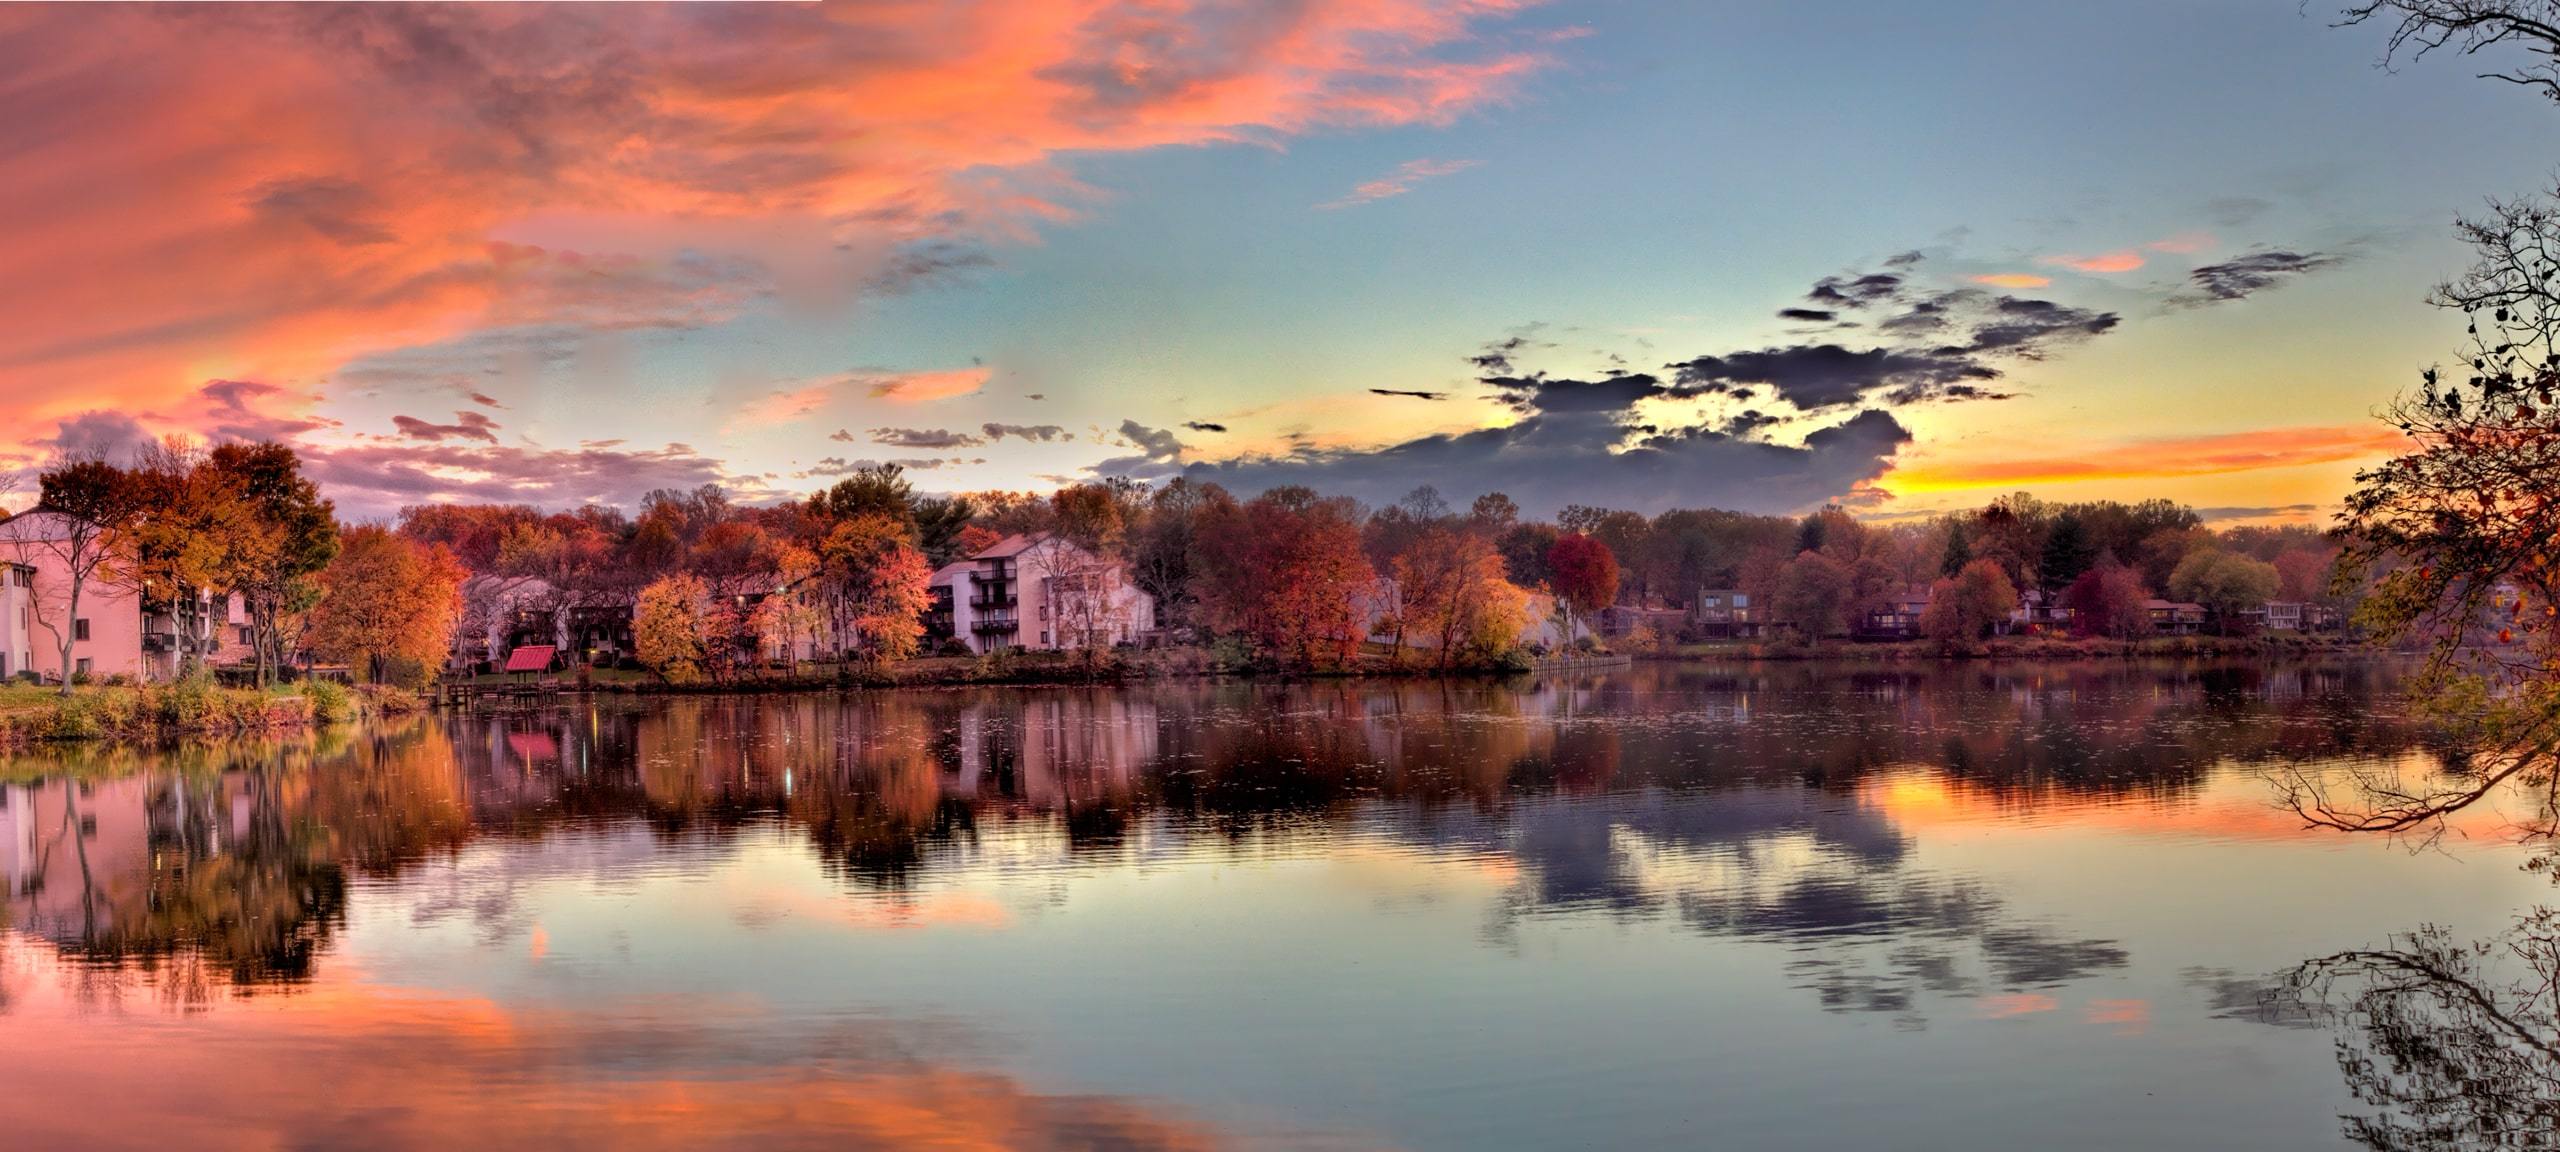 Sunset over Wilde Lake in Columbia, Maryland